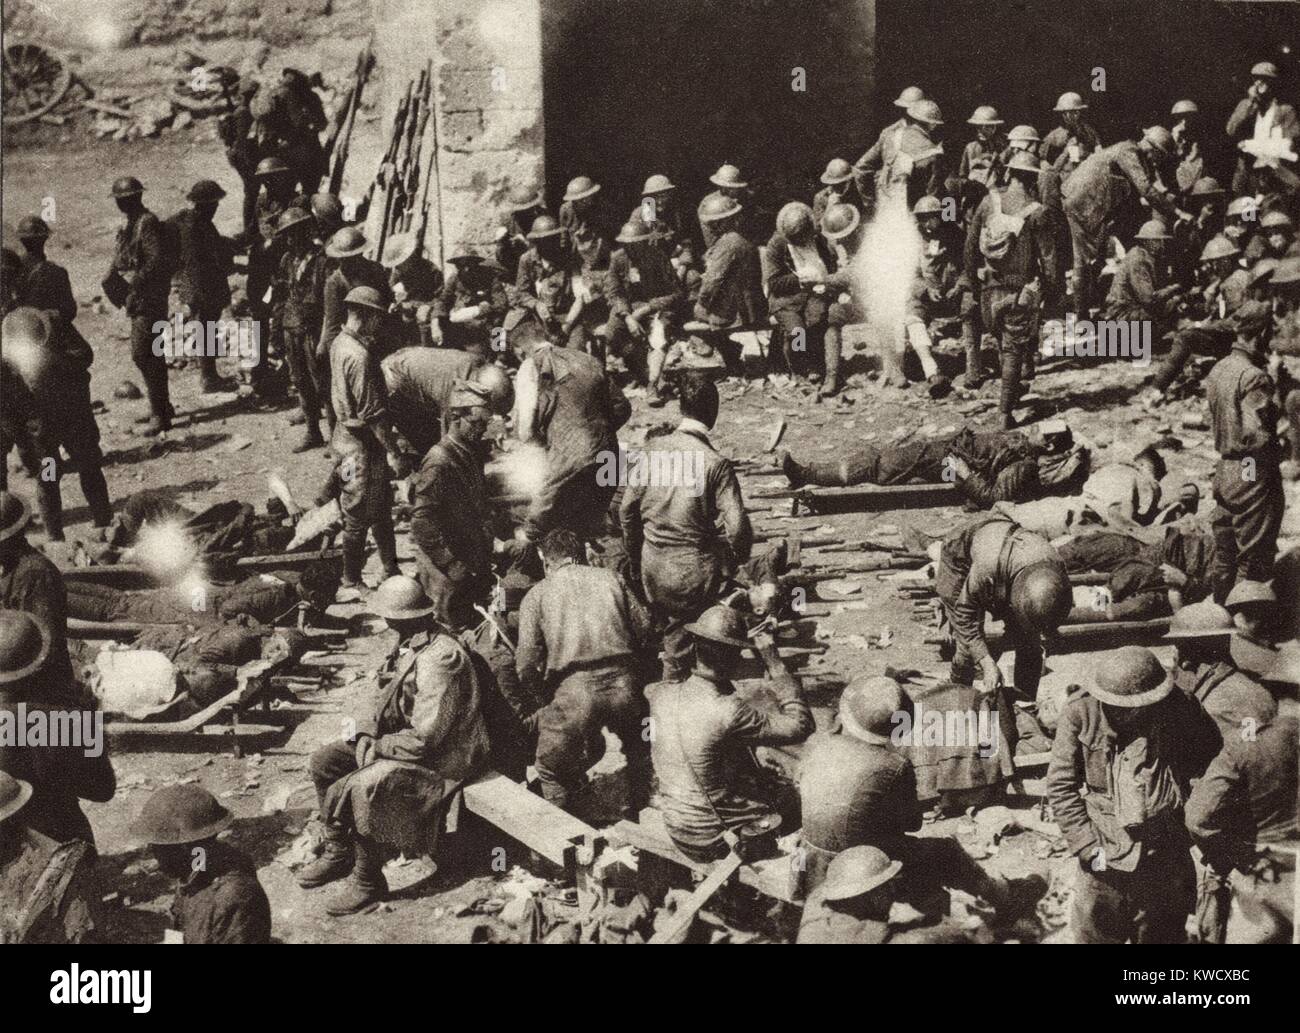 World War 1: American Red Cross First-Aid station in French town on the Western Front. Badly wounded soldiers have just been brought in from the battlefield on stretchers, while others, slightly wounded, wait their turn. In the summer of 1918 U. S. armies suffered casualties on the large scale associated with the battles of the Great War. (BSLOC 2013 1 191) Stock Photo